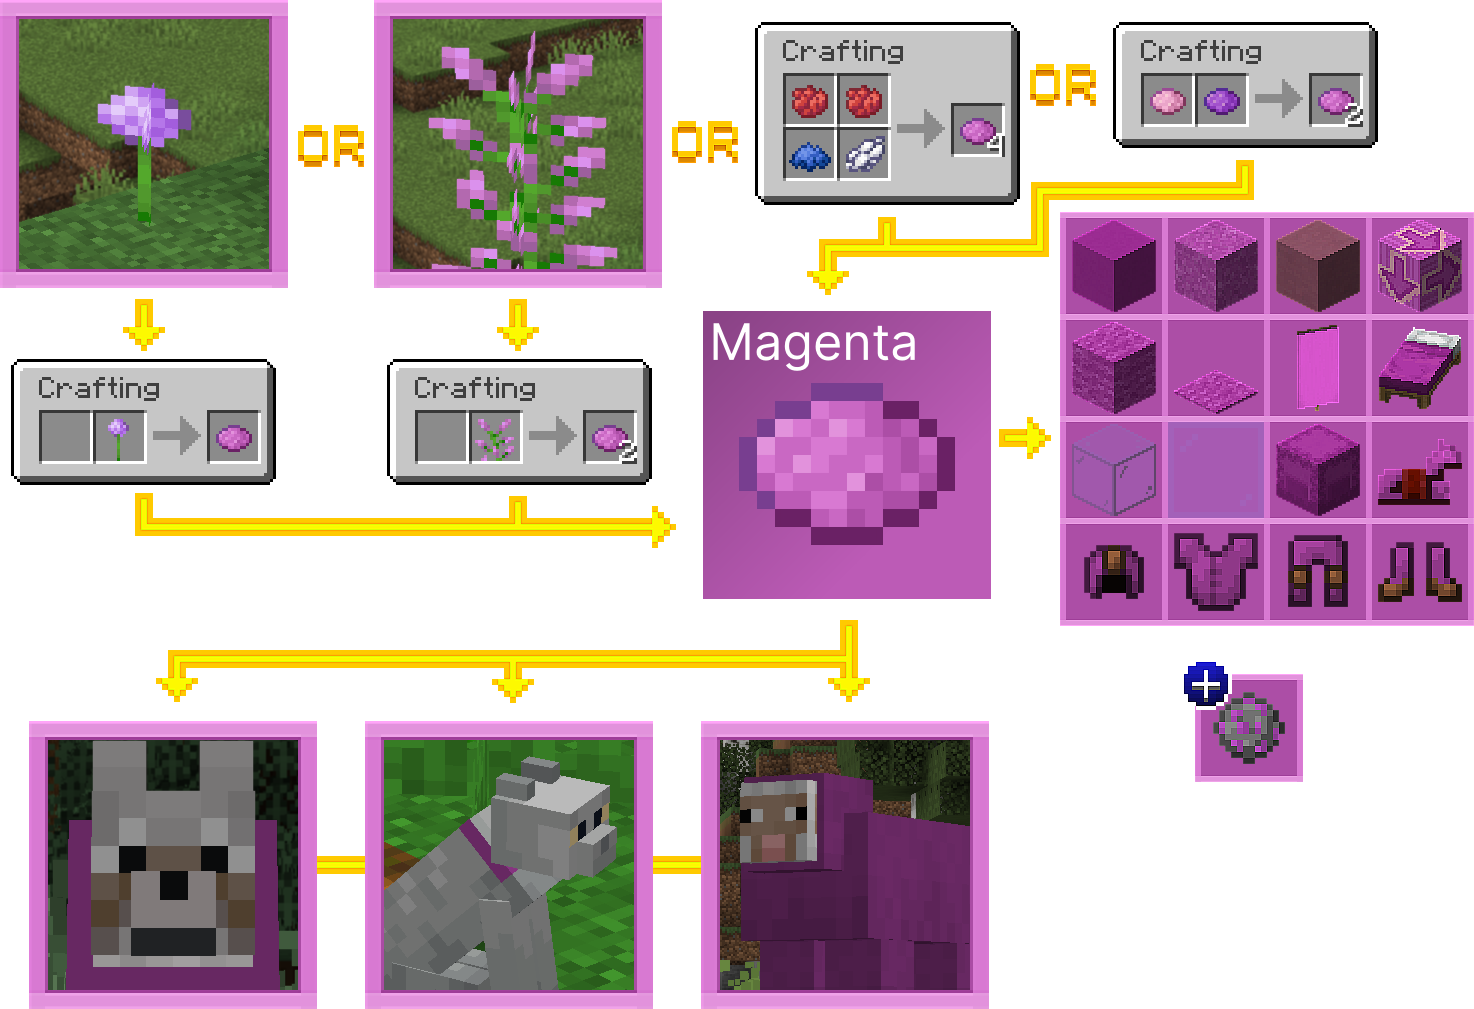 Minecraft: How to Make Pink Dye